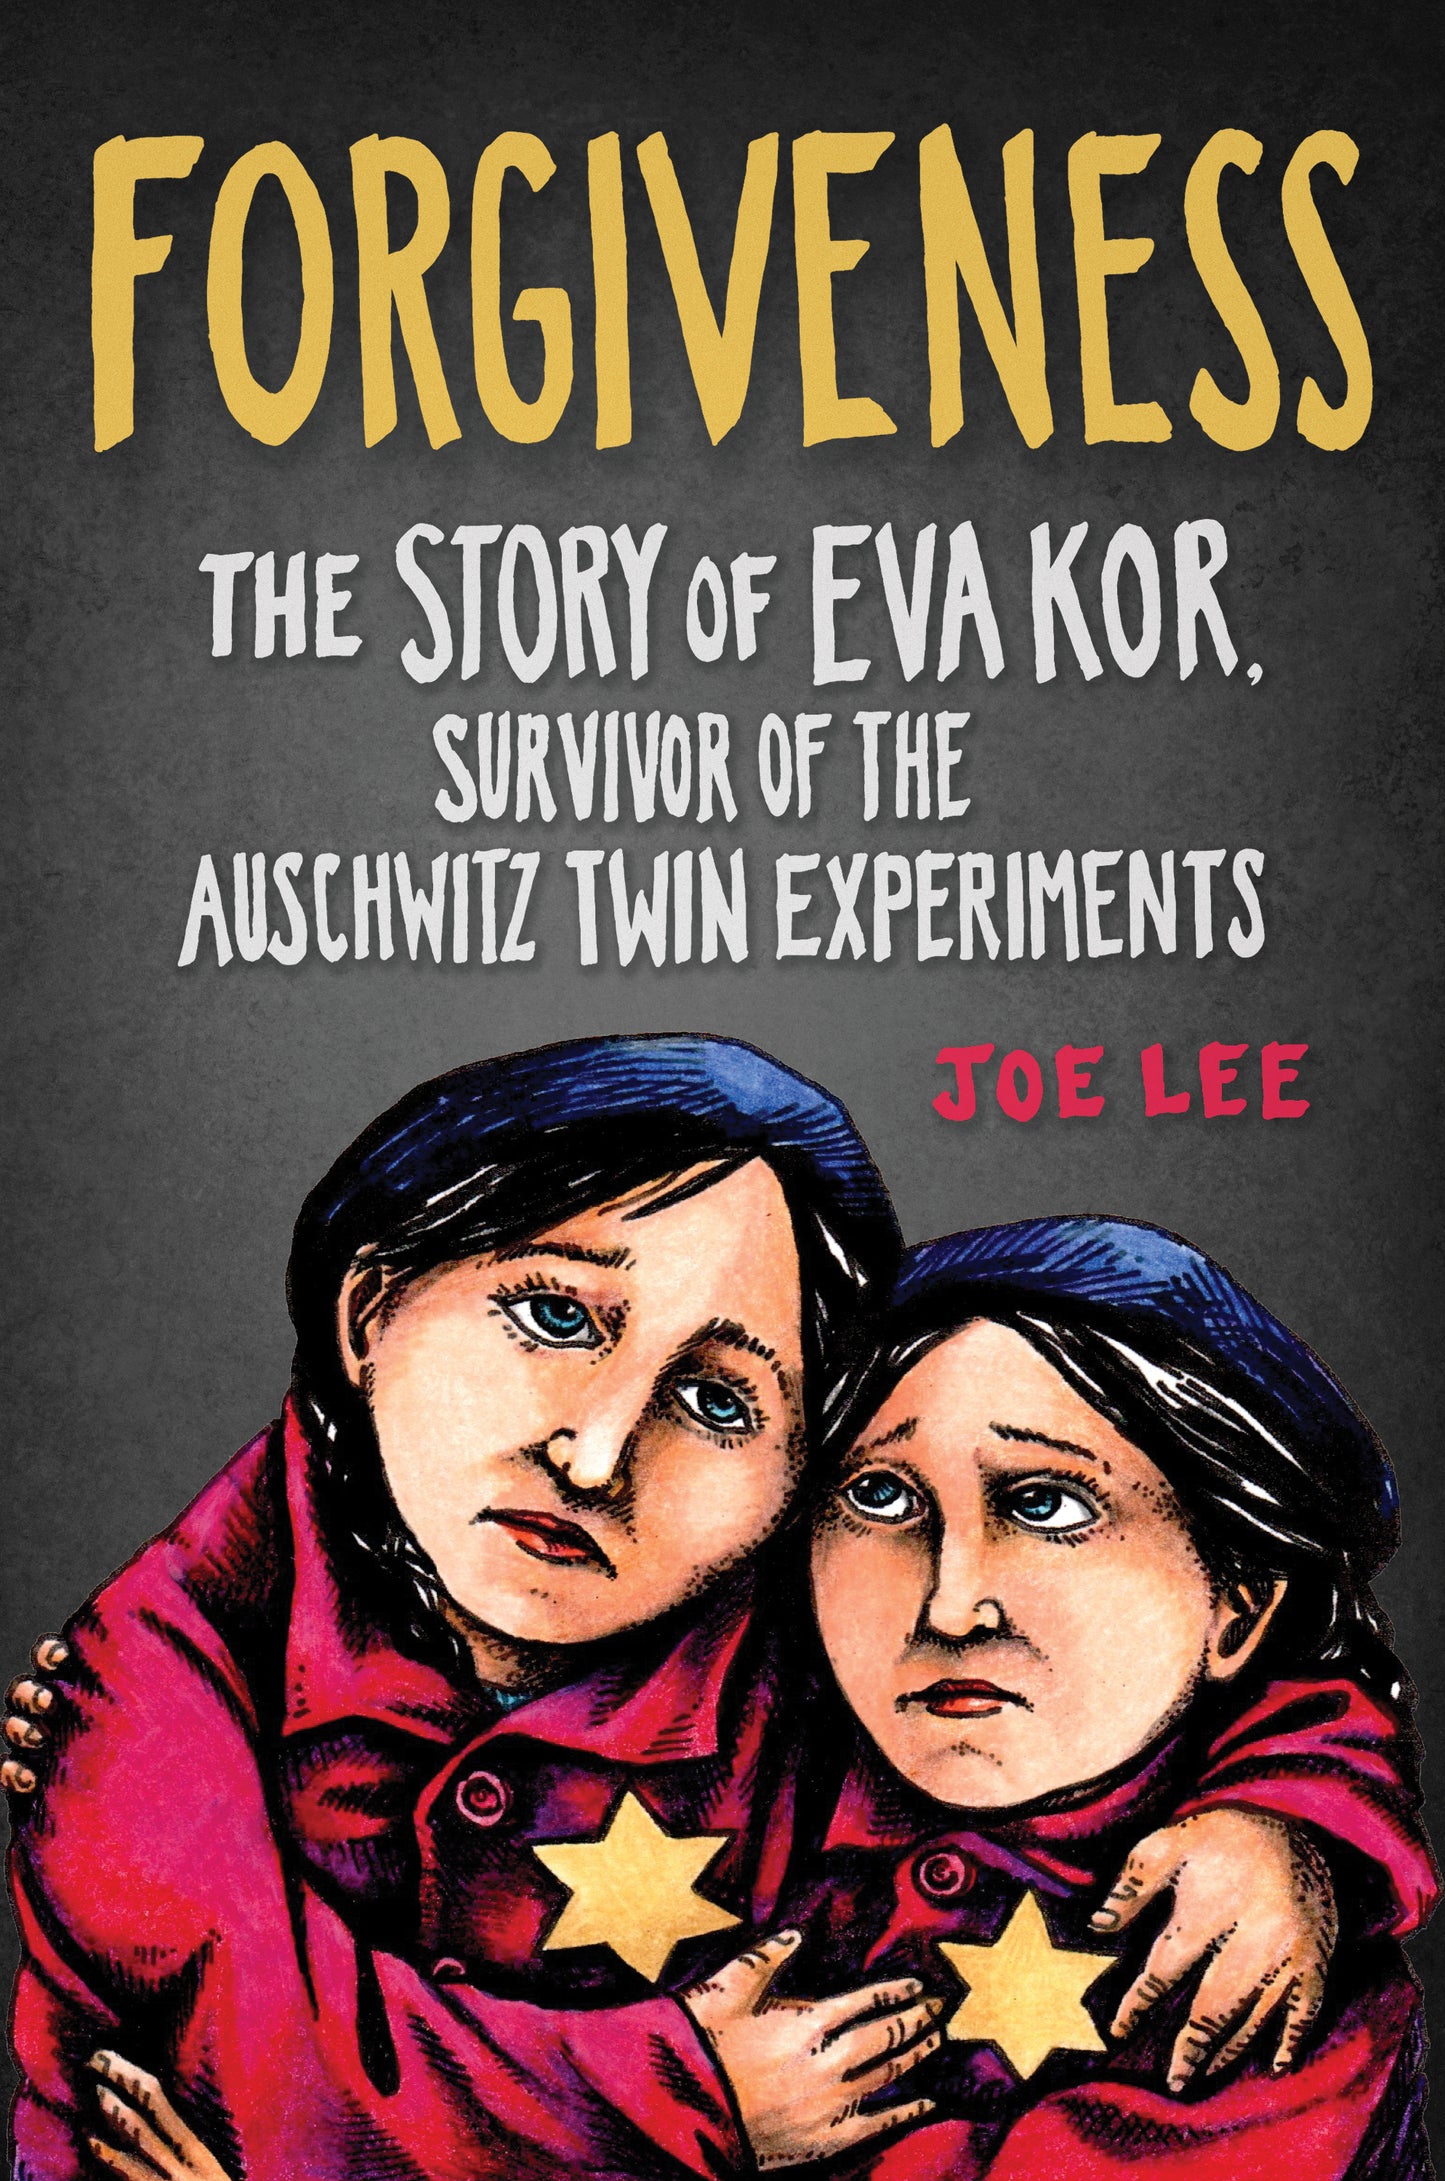 Forgiveness: The Story of Eva Kor, Survivor of the Auschwitz Twin Experiments